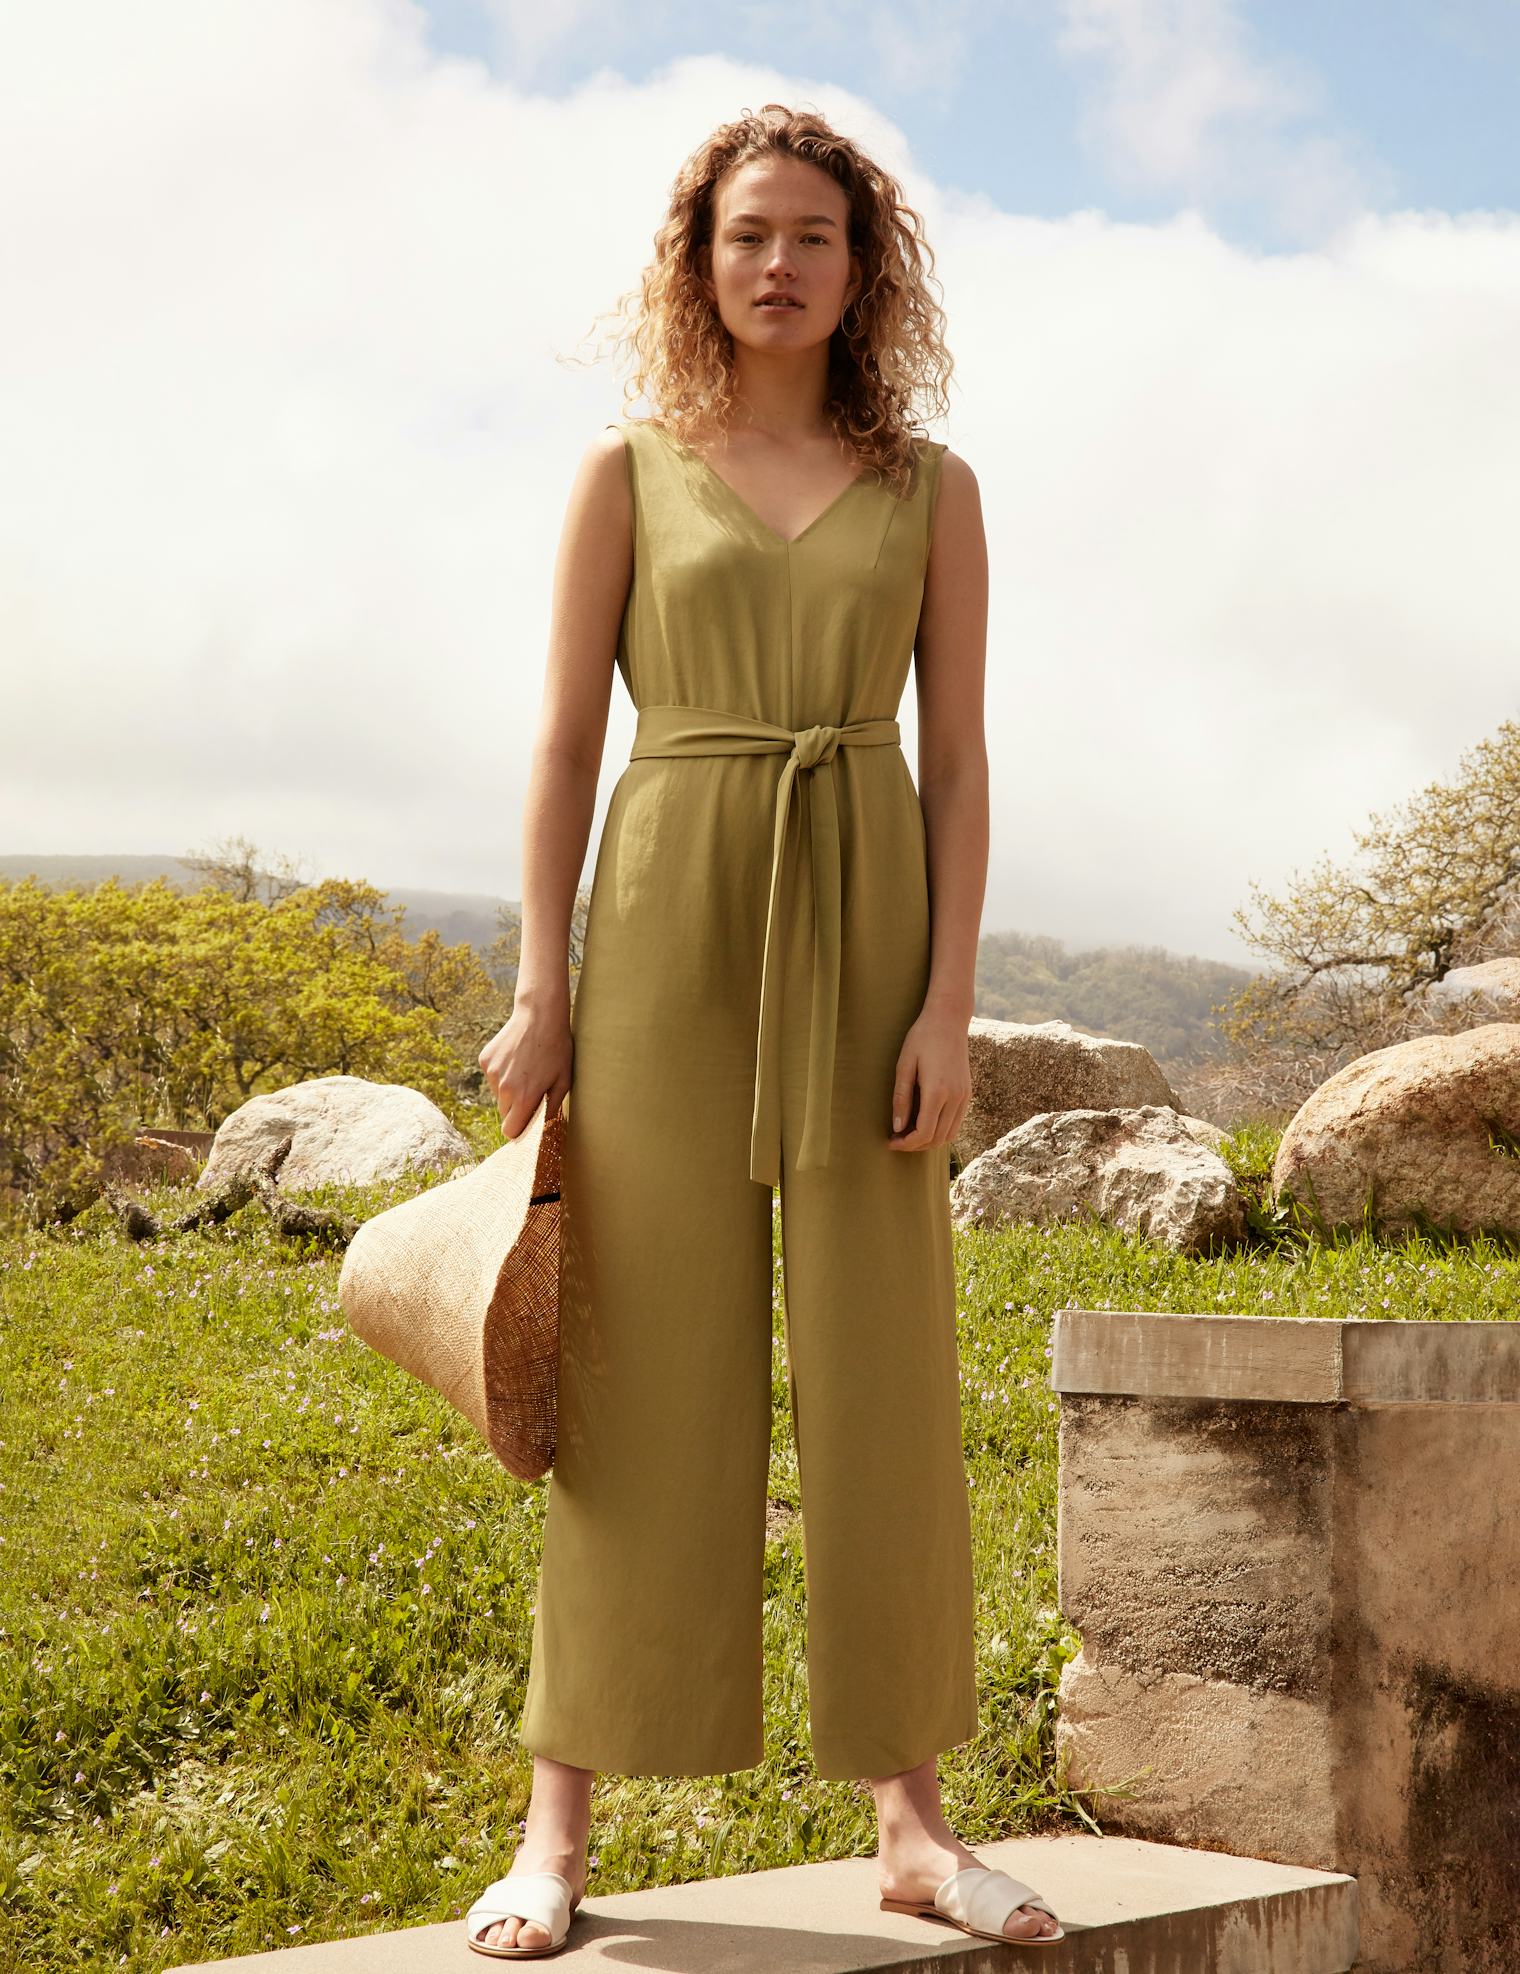 Everlane's New Jumpsuits Are A Summer Trend You'll Want To Wear Every Day